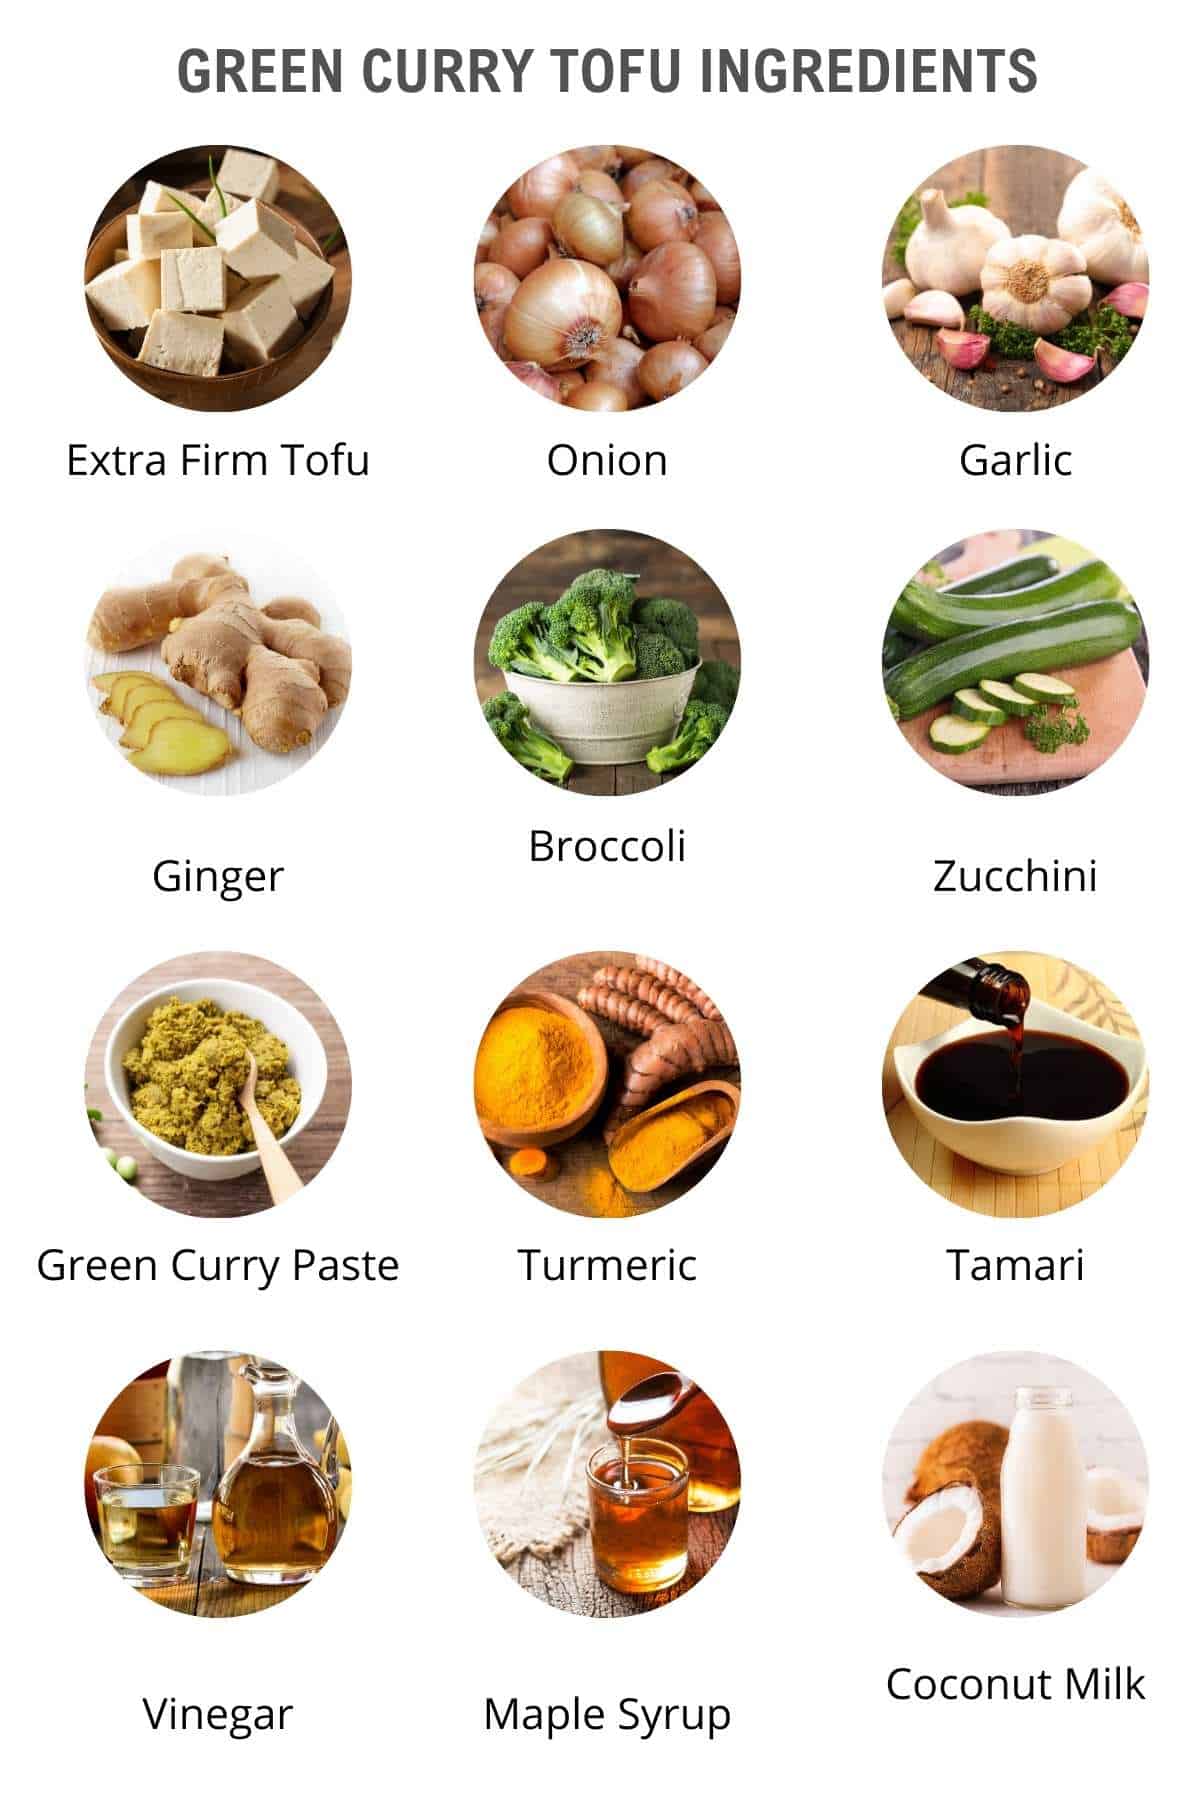 pictures of the thai green curry ingredients as an infographic.